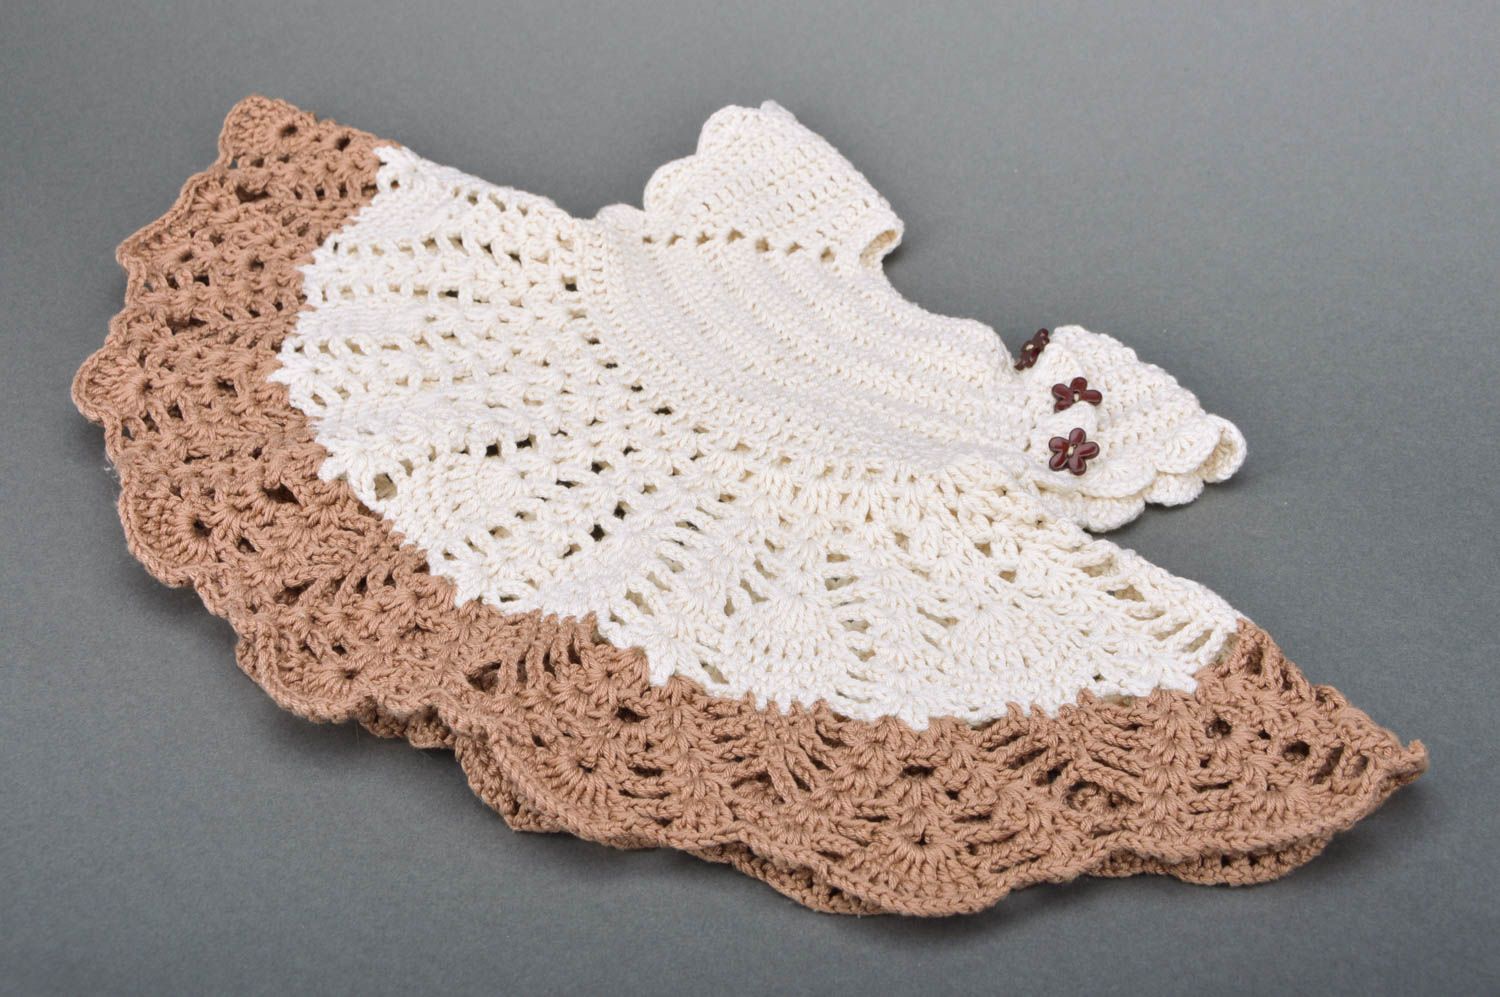 Handmade baby girl lace dress crocheted of acrylic threads beige and brown photo 3